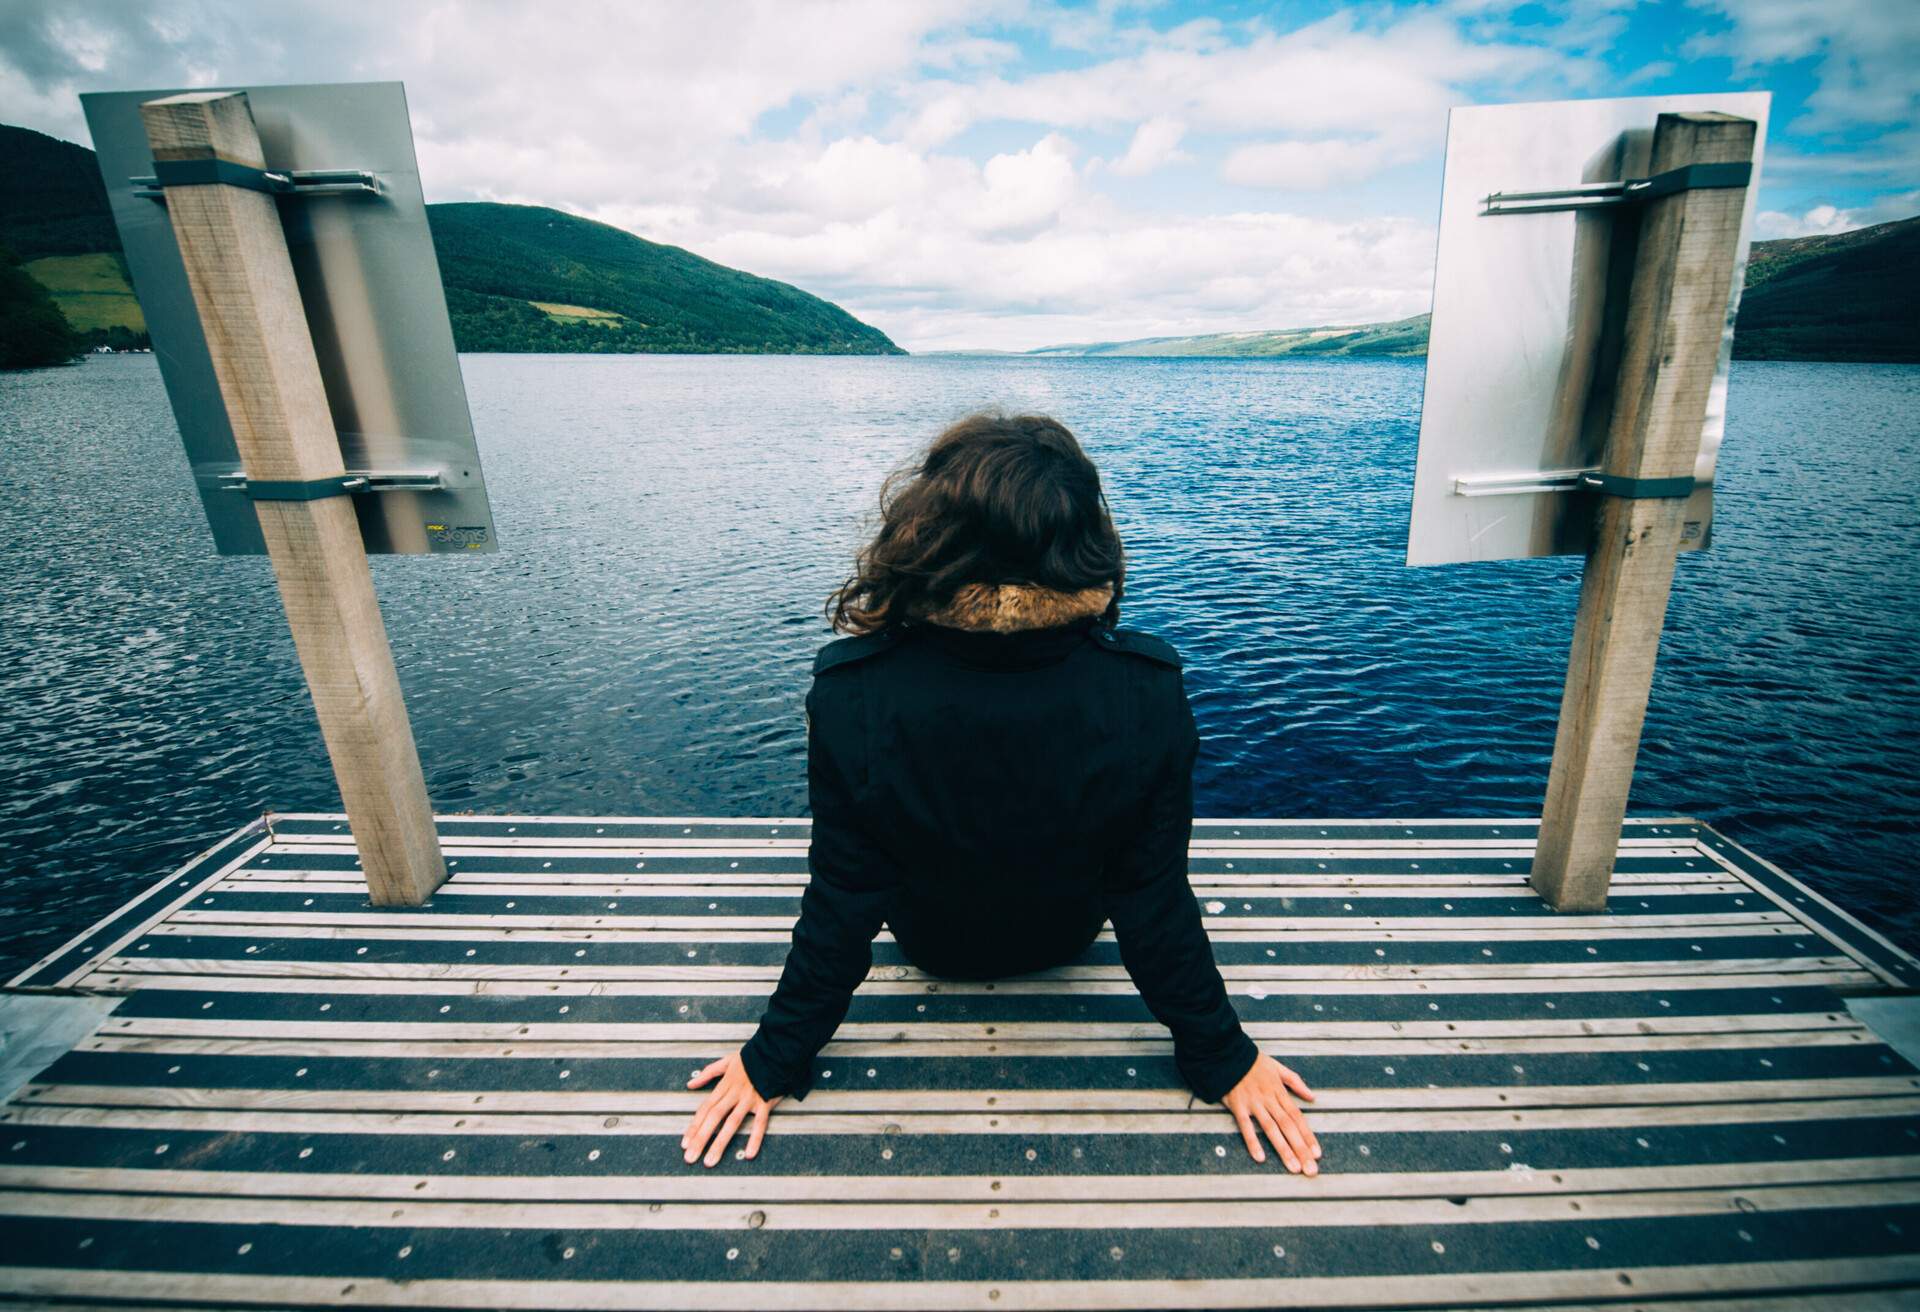 A young woman sits on a dock with a view of a  large freshwater lake surrounded by lush mountains.